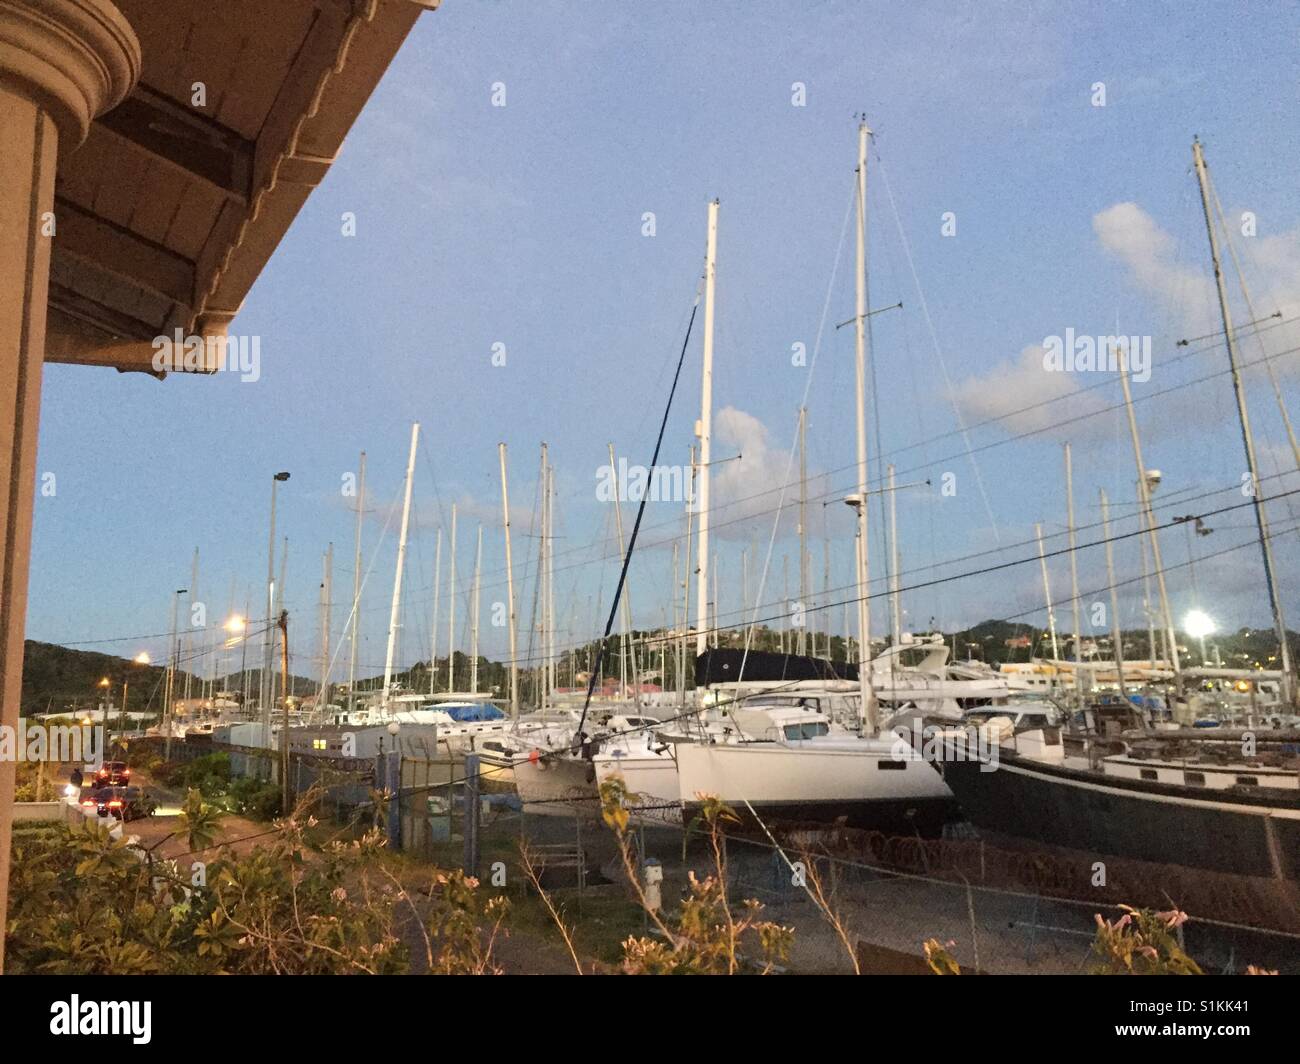 View of Dry Dock at Rodney Bay Marina in Saint Lucia Stock Photo